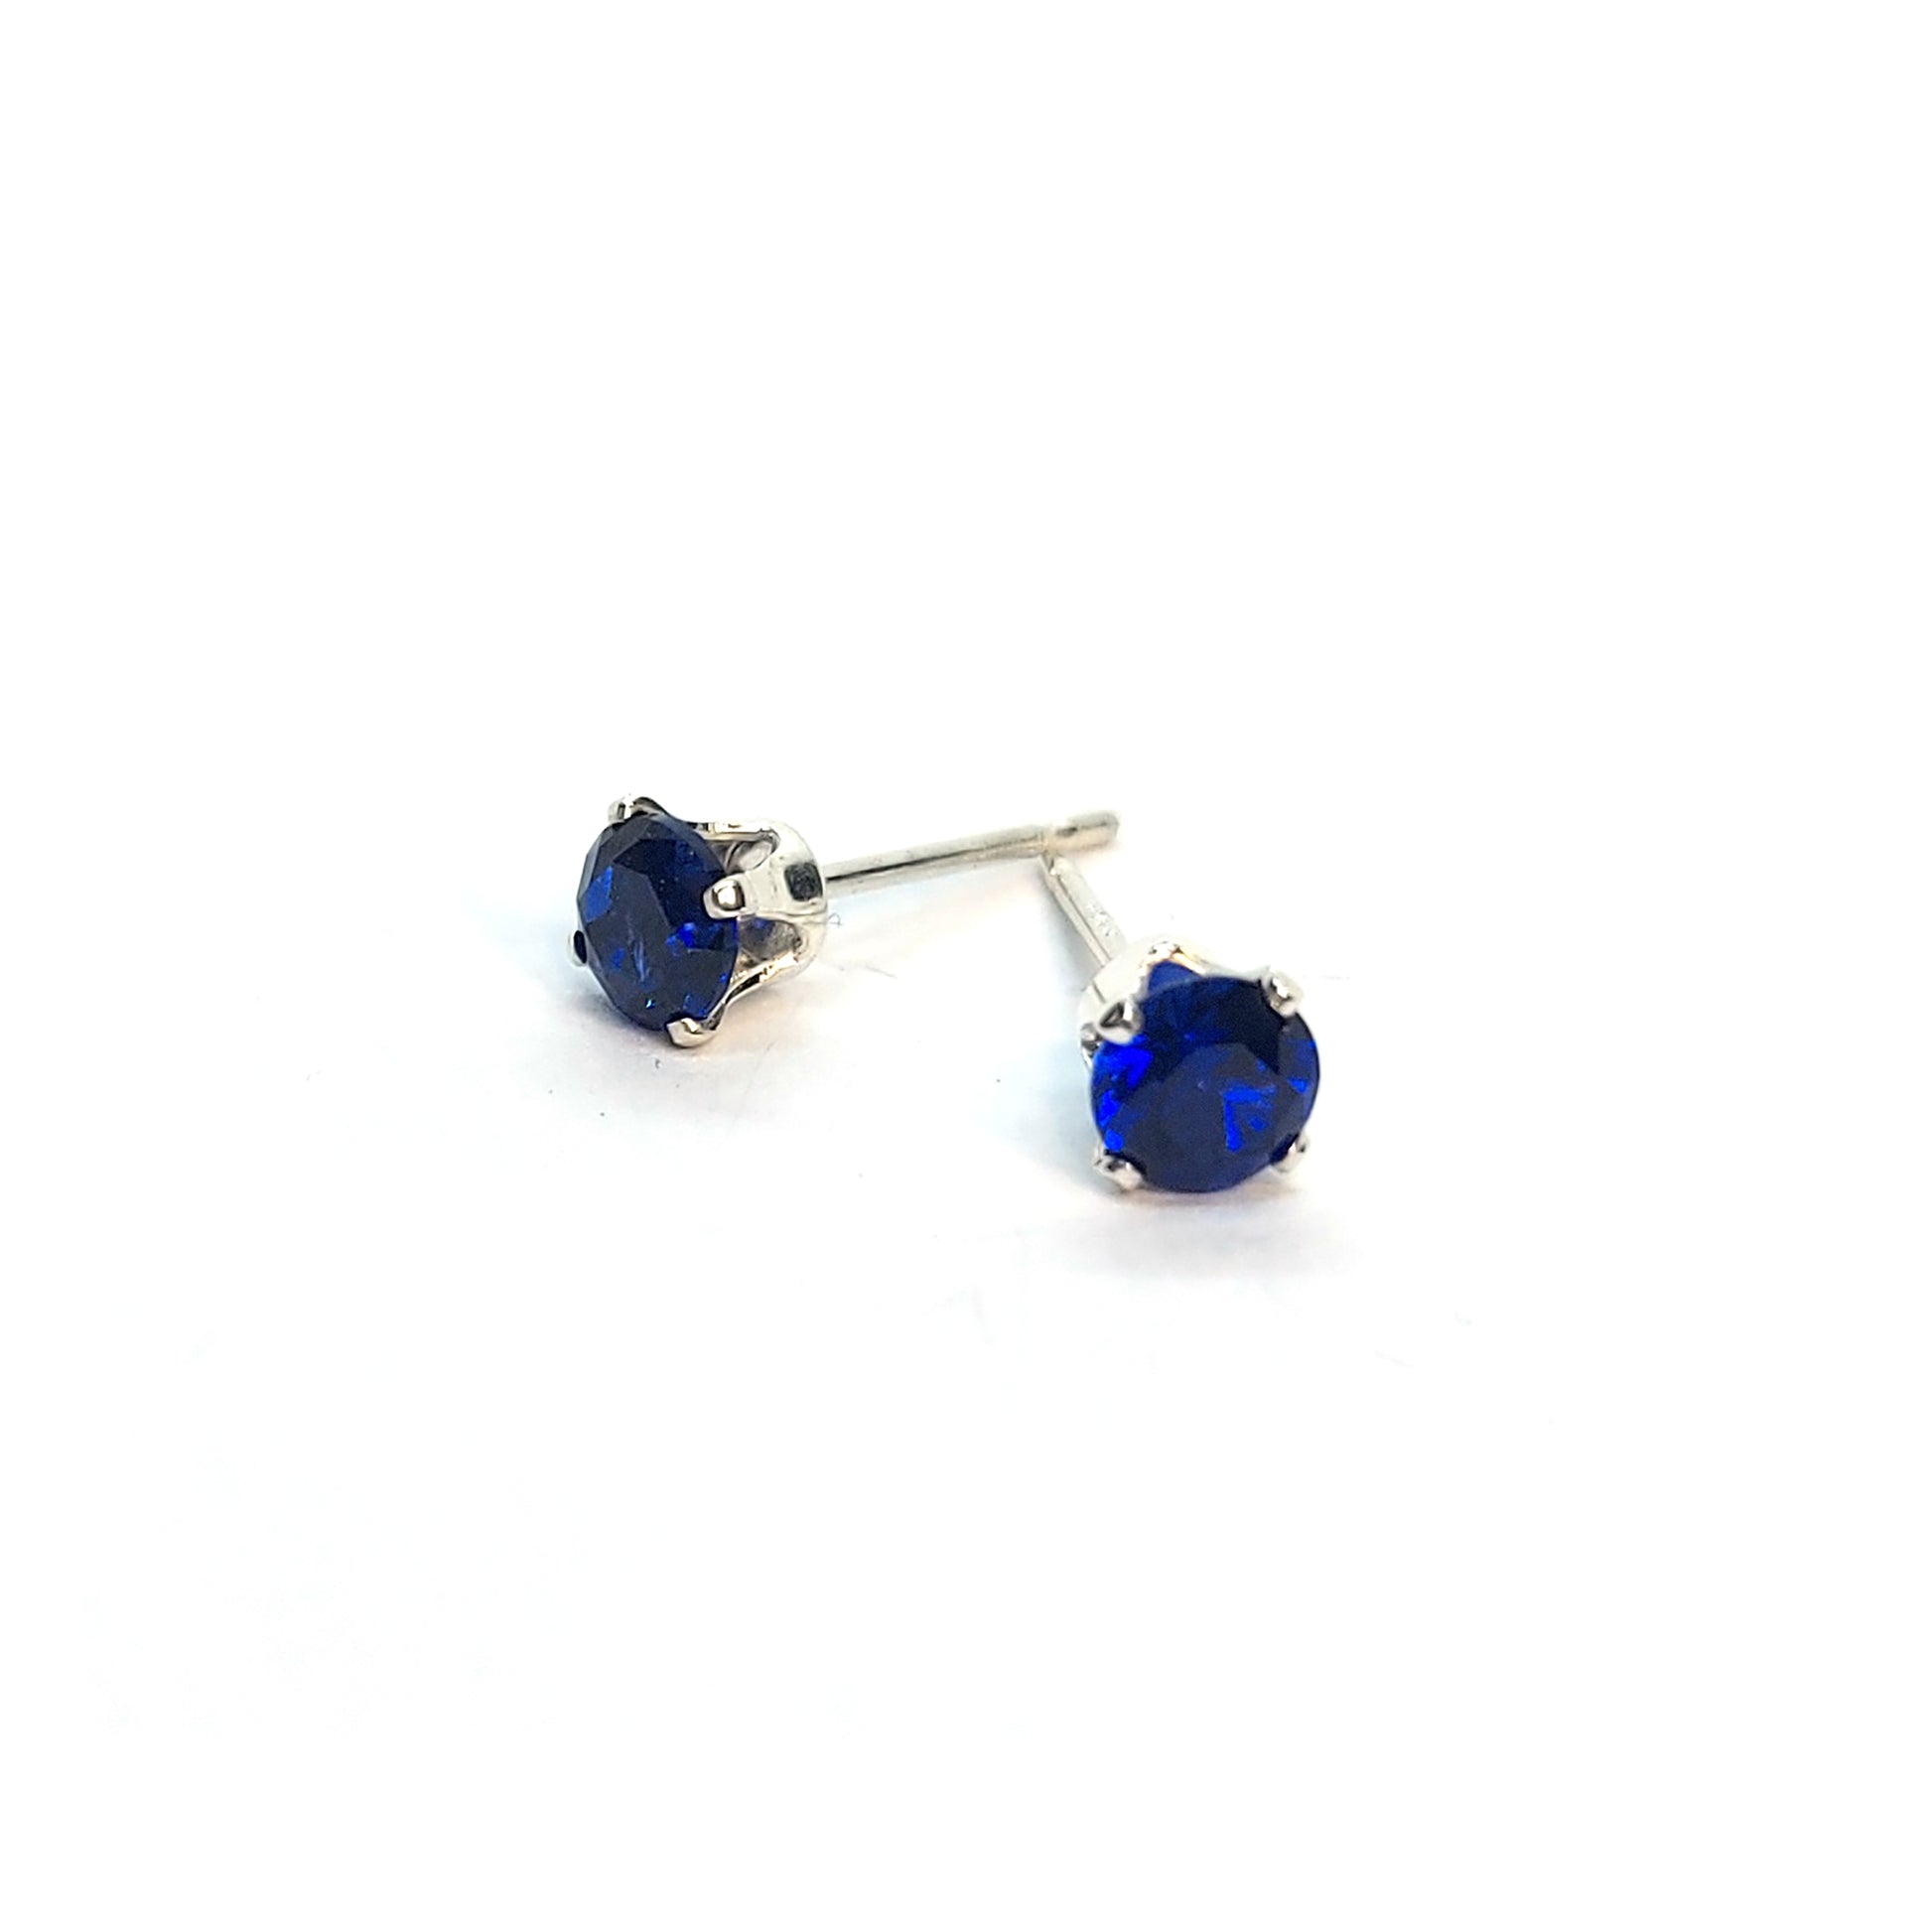 Silver 4 claw stud earrings set with dark blue sapphires. 4mm